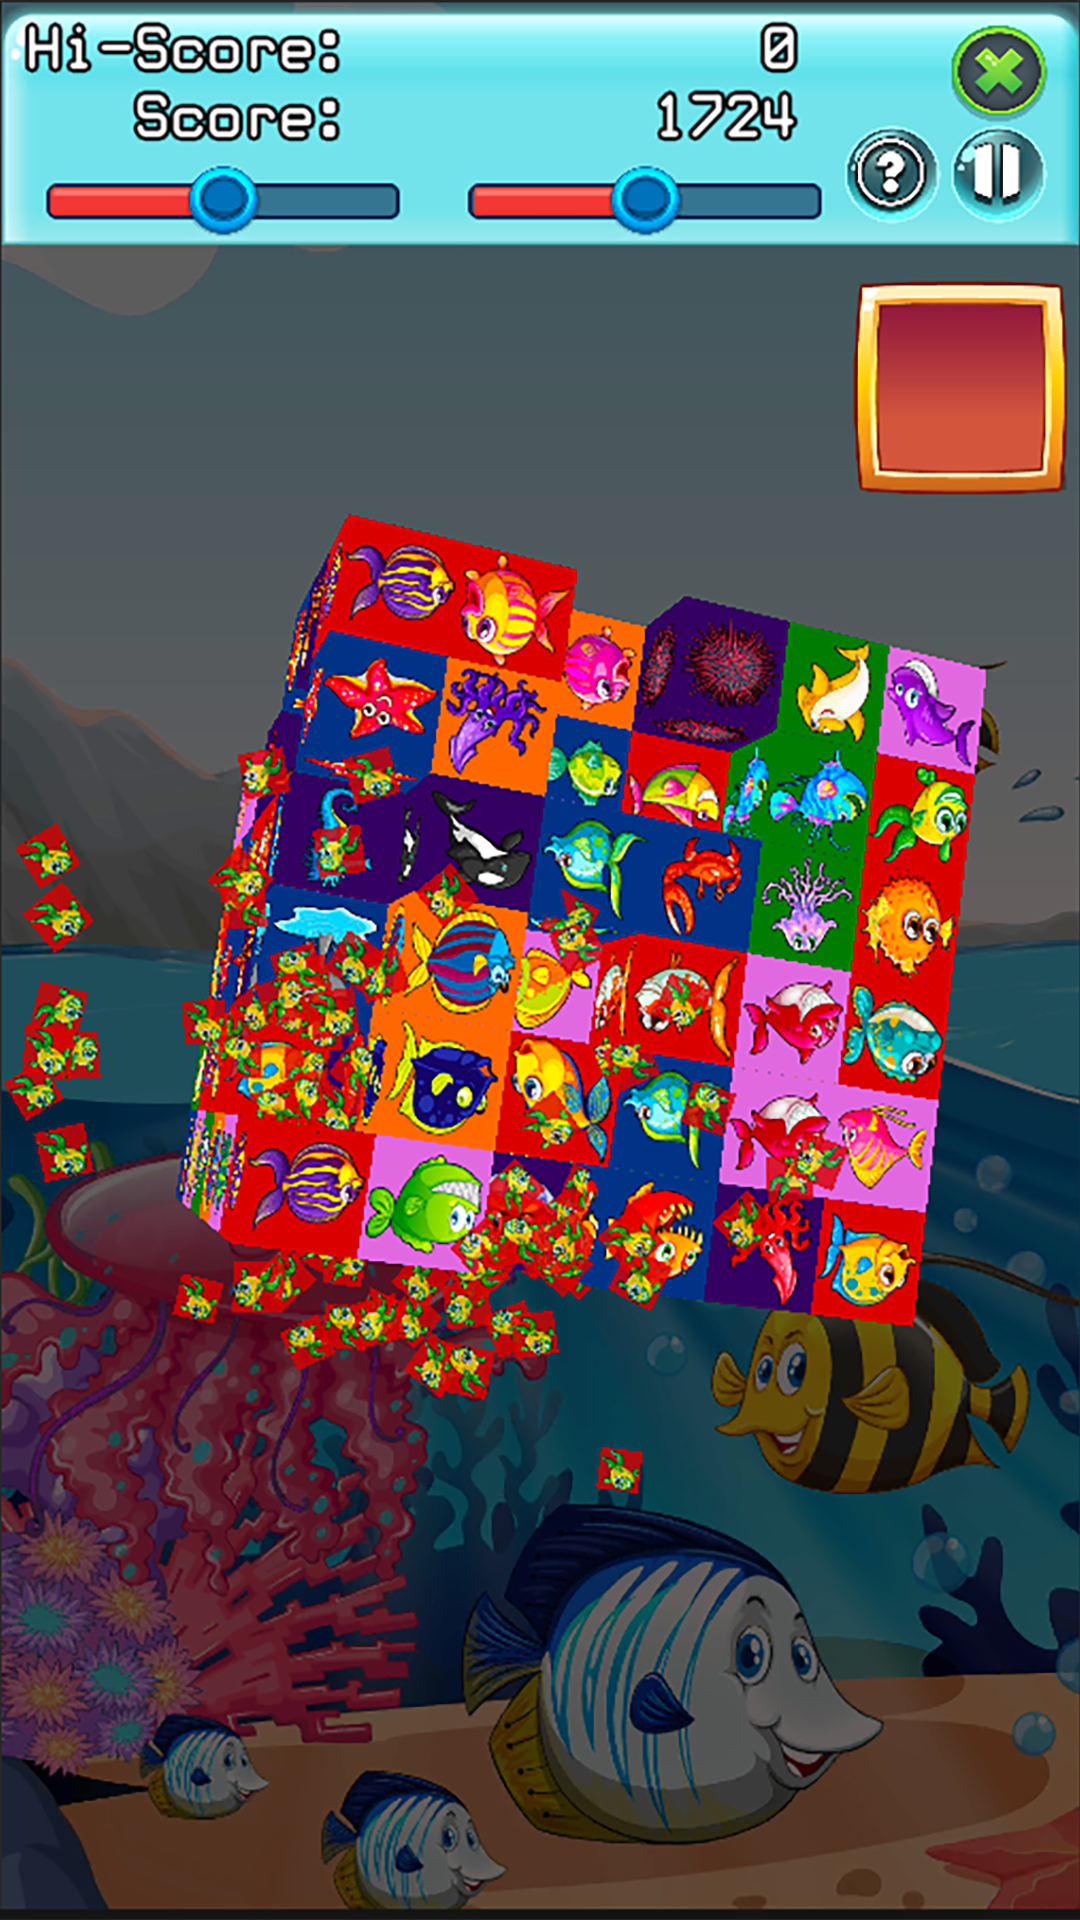 Fishology - Themed 3D cube matching puzzle game